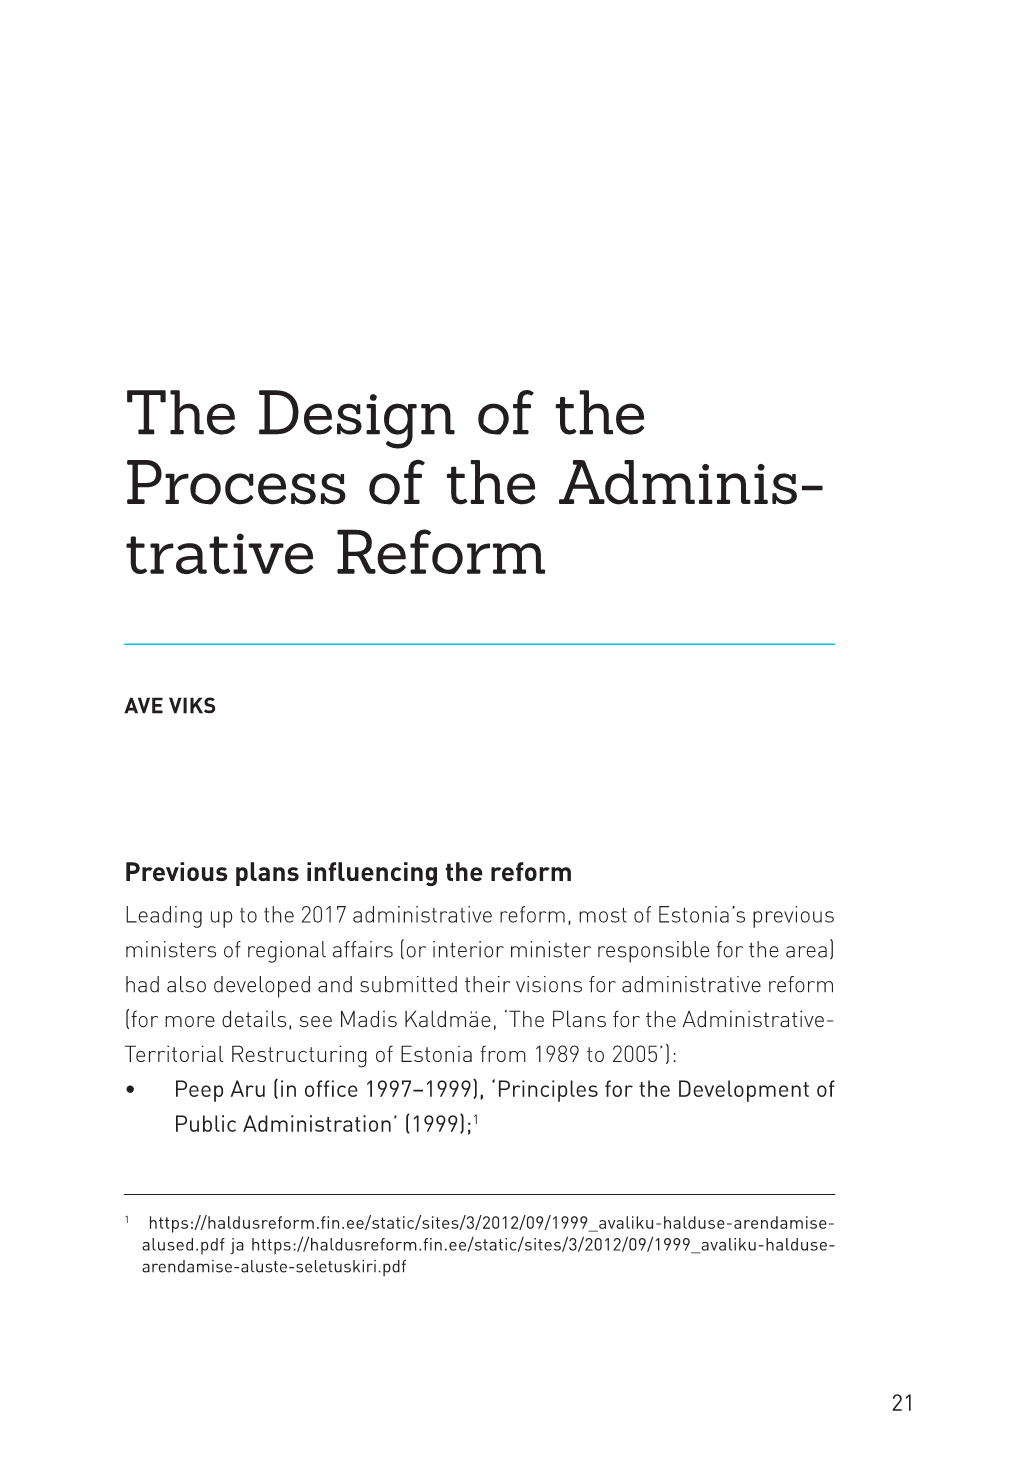 The Design of the Process of the Adminis- Trative Reform